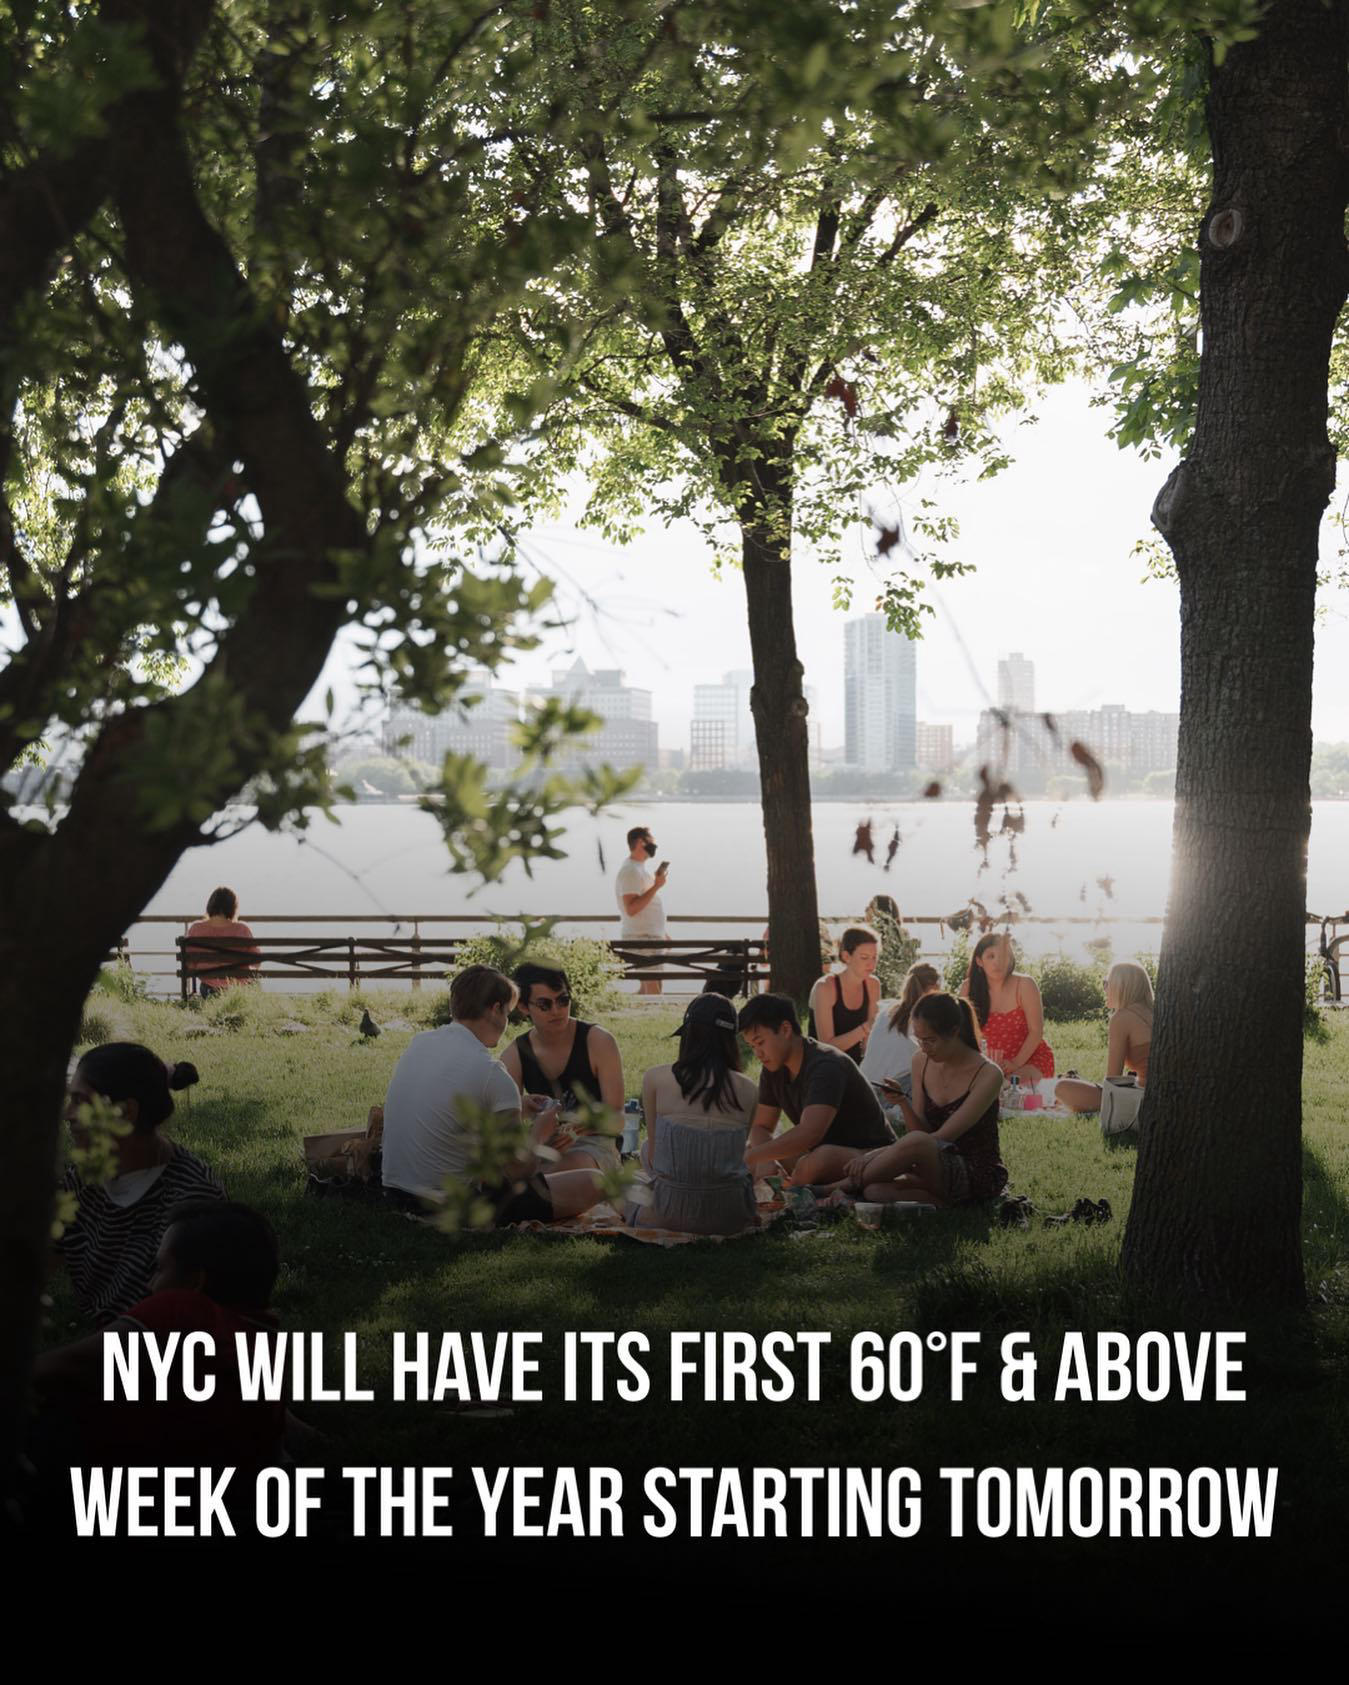 NYC will have its first 60°F